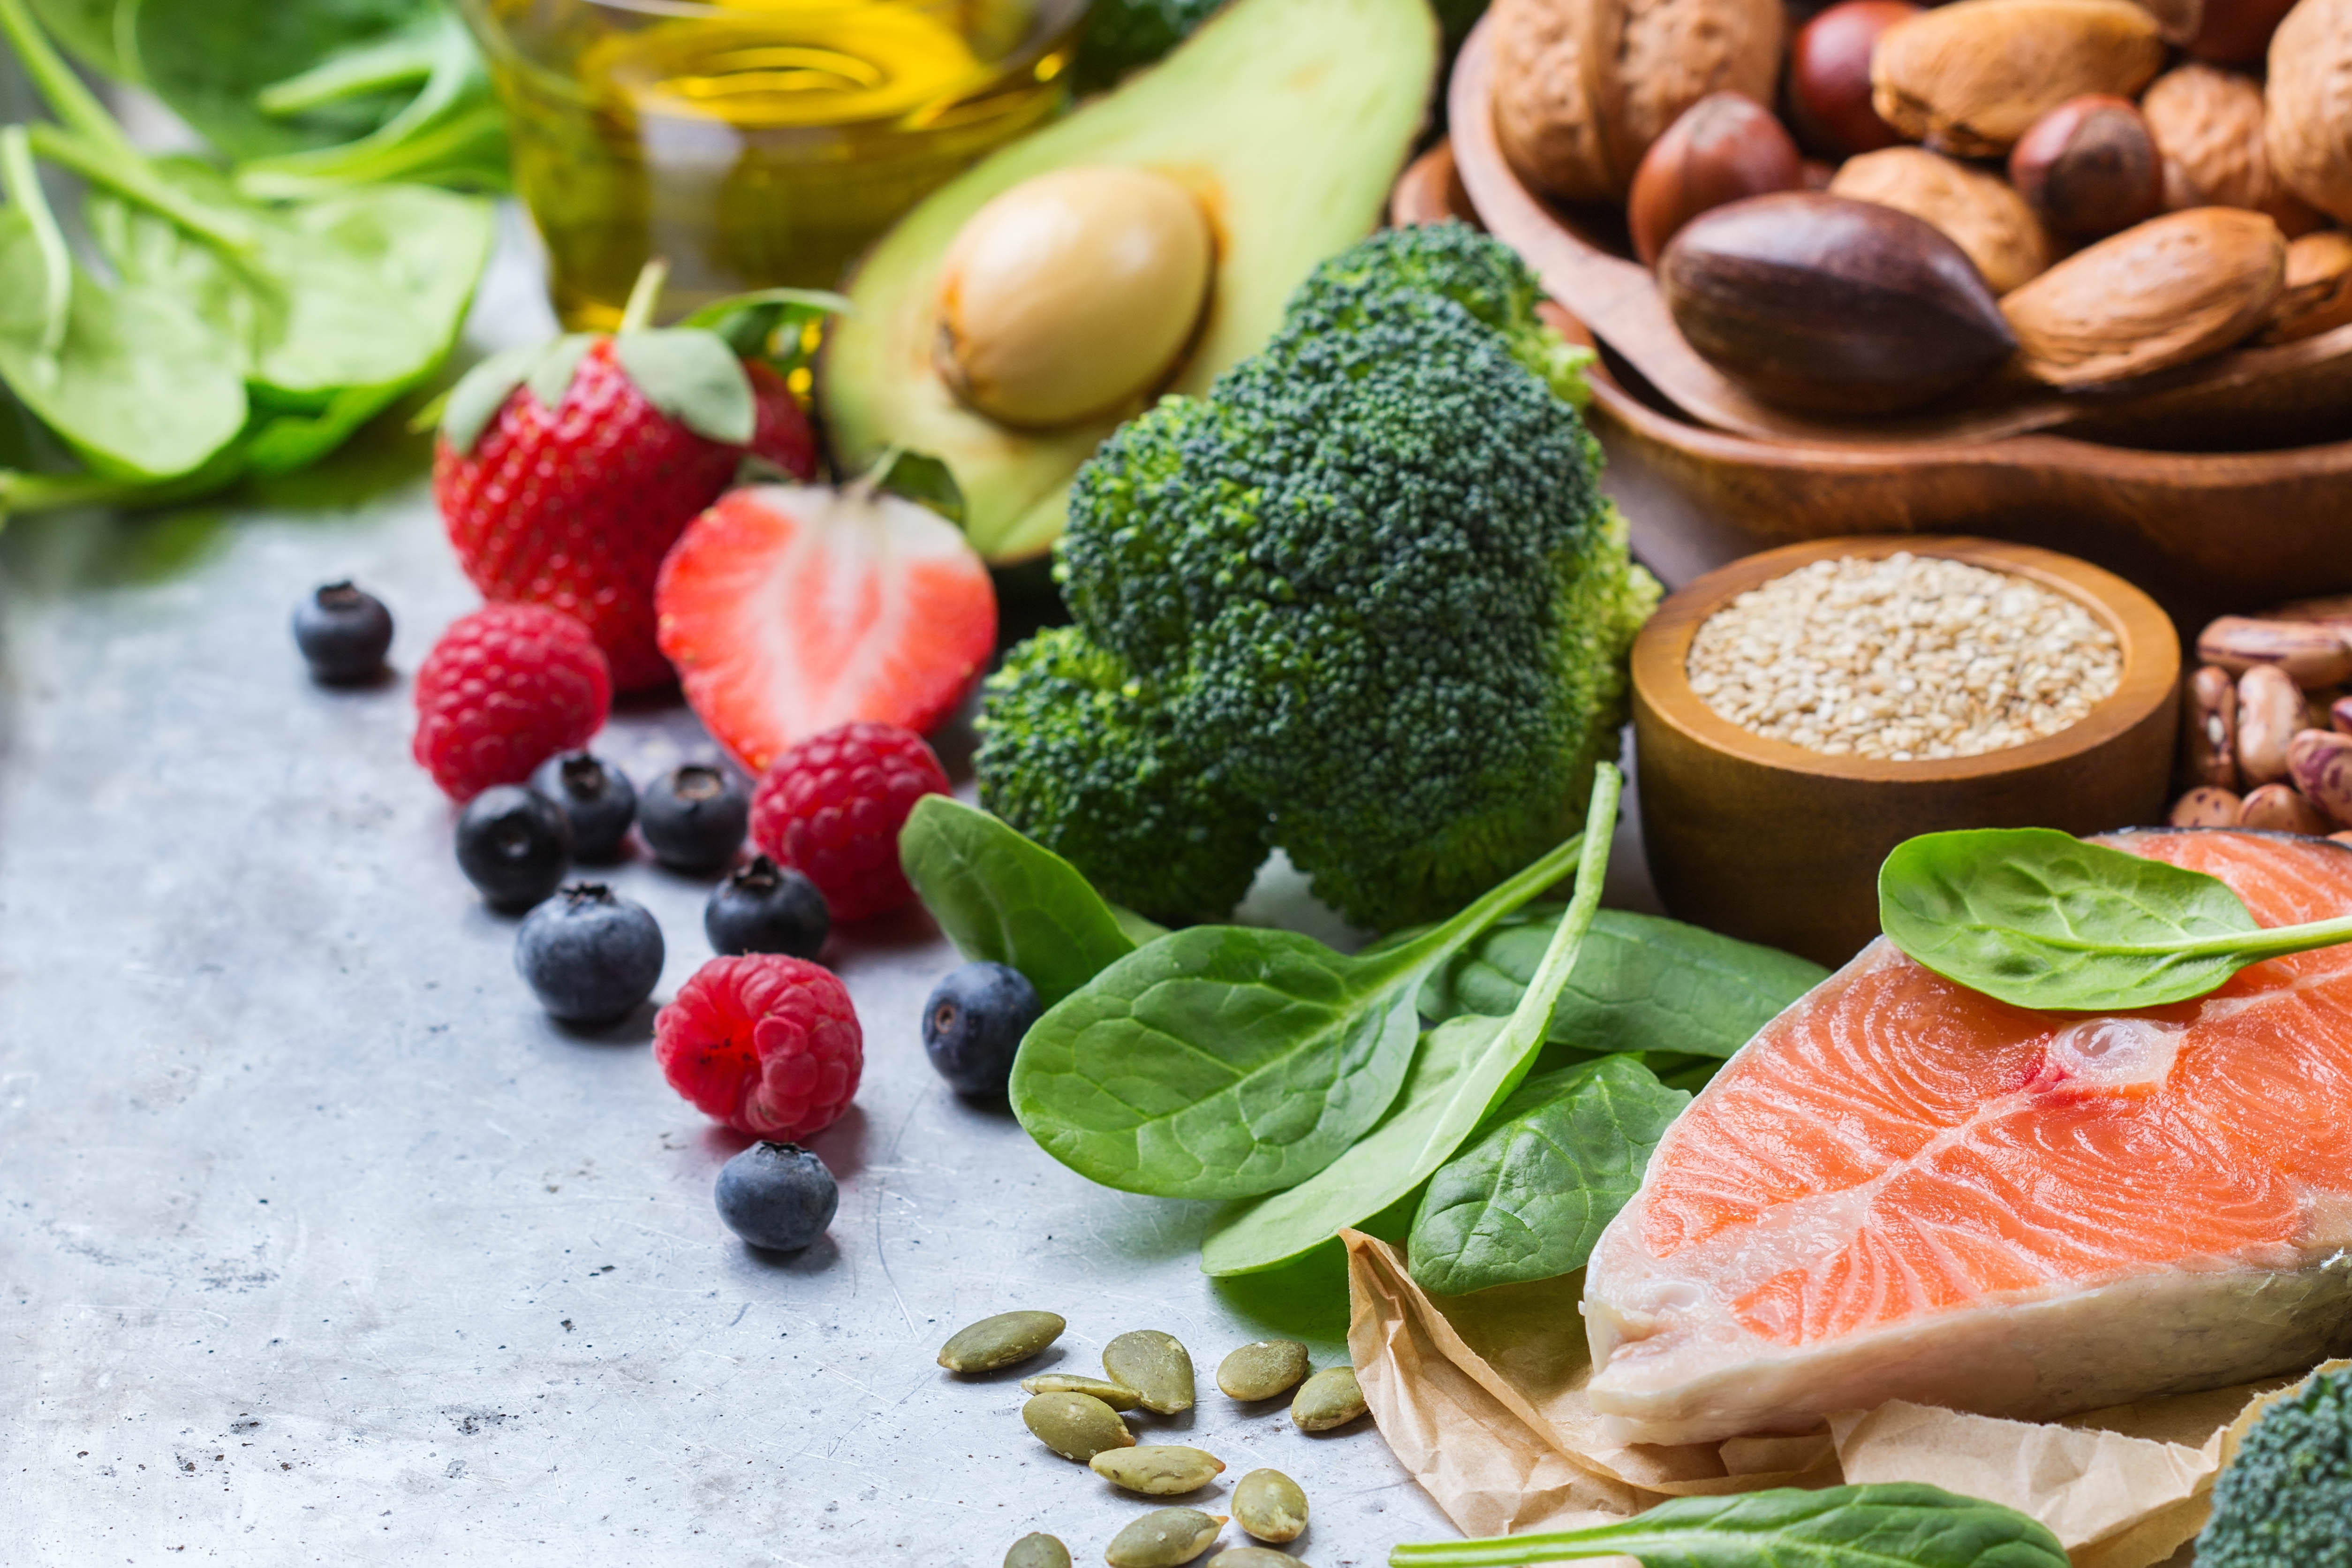 Healthy foods including salmon, spinach, nuts, fruit, seeds, and more